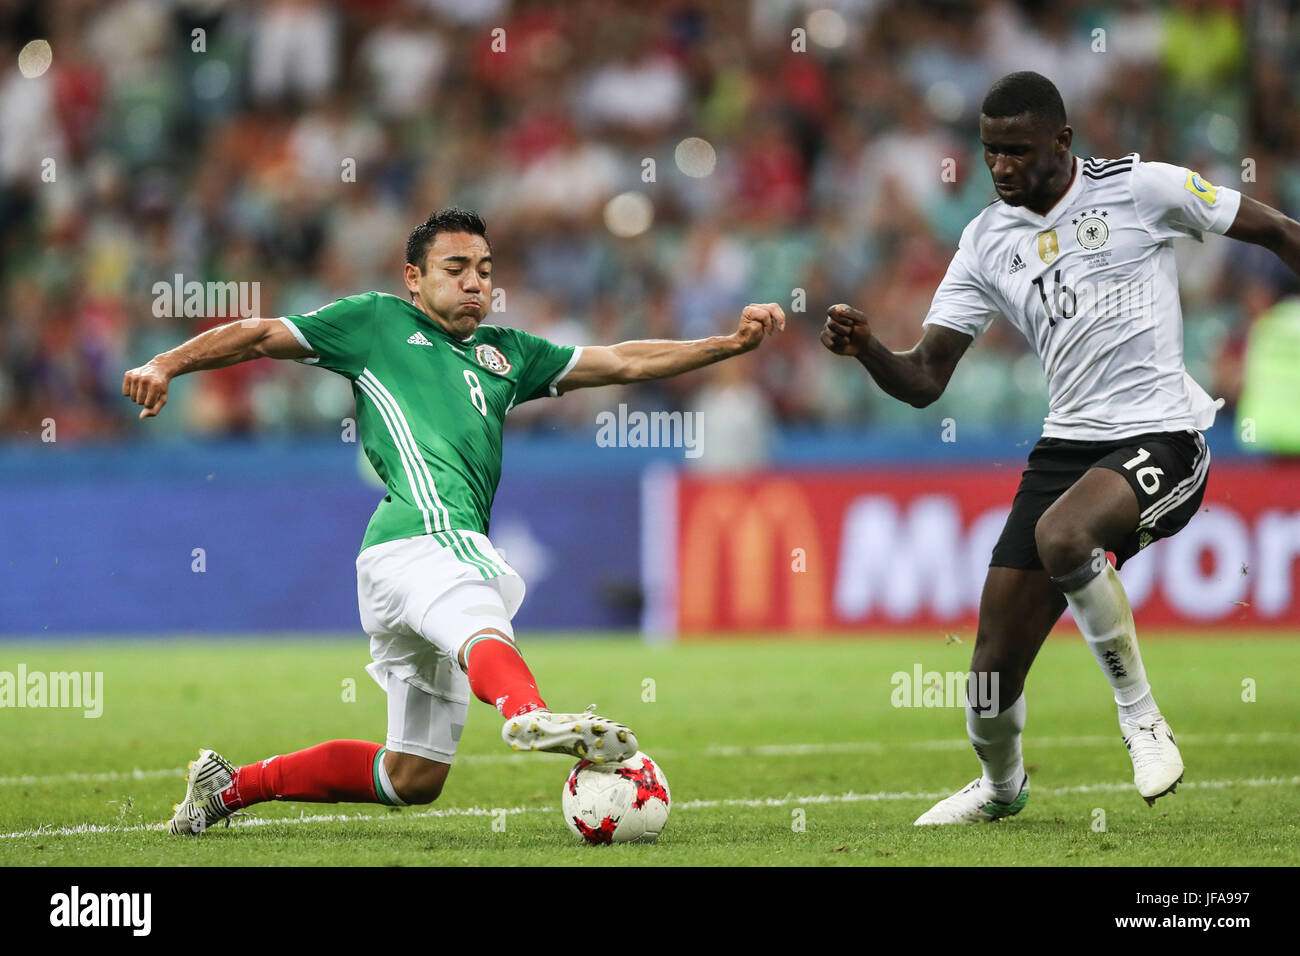 Sochi, Russia. 29th June, 2017. Marco Fabian (L) of Mexico vies with Antonio Ruediger of Germany during the semifinal match of the 2017 FIFA Confederations Cup against Germany in Sochi, Russia, June 29, 2017. Mexico lost 1-4. Credit: Wu Zhuang/Xinhua/Alamy Live News Stock Photo